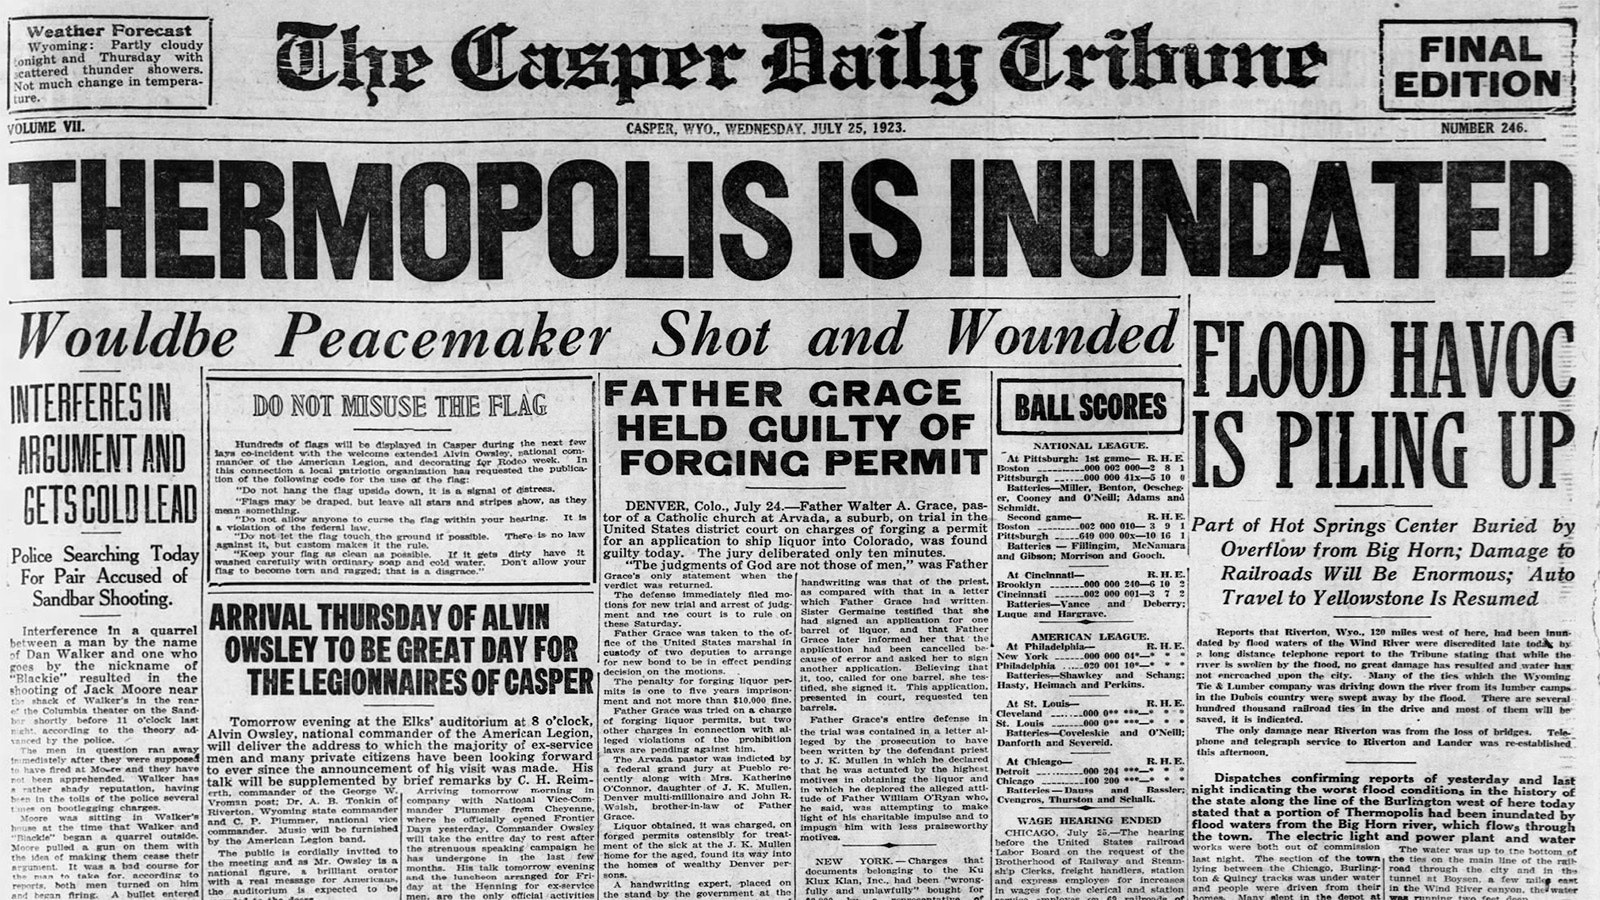 The Casper Daily Tribune carried banner headline about the effects of the torrential rains in July 1923.